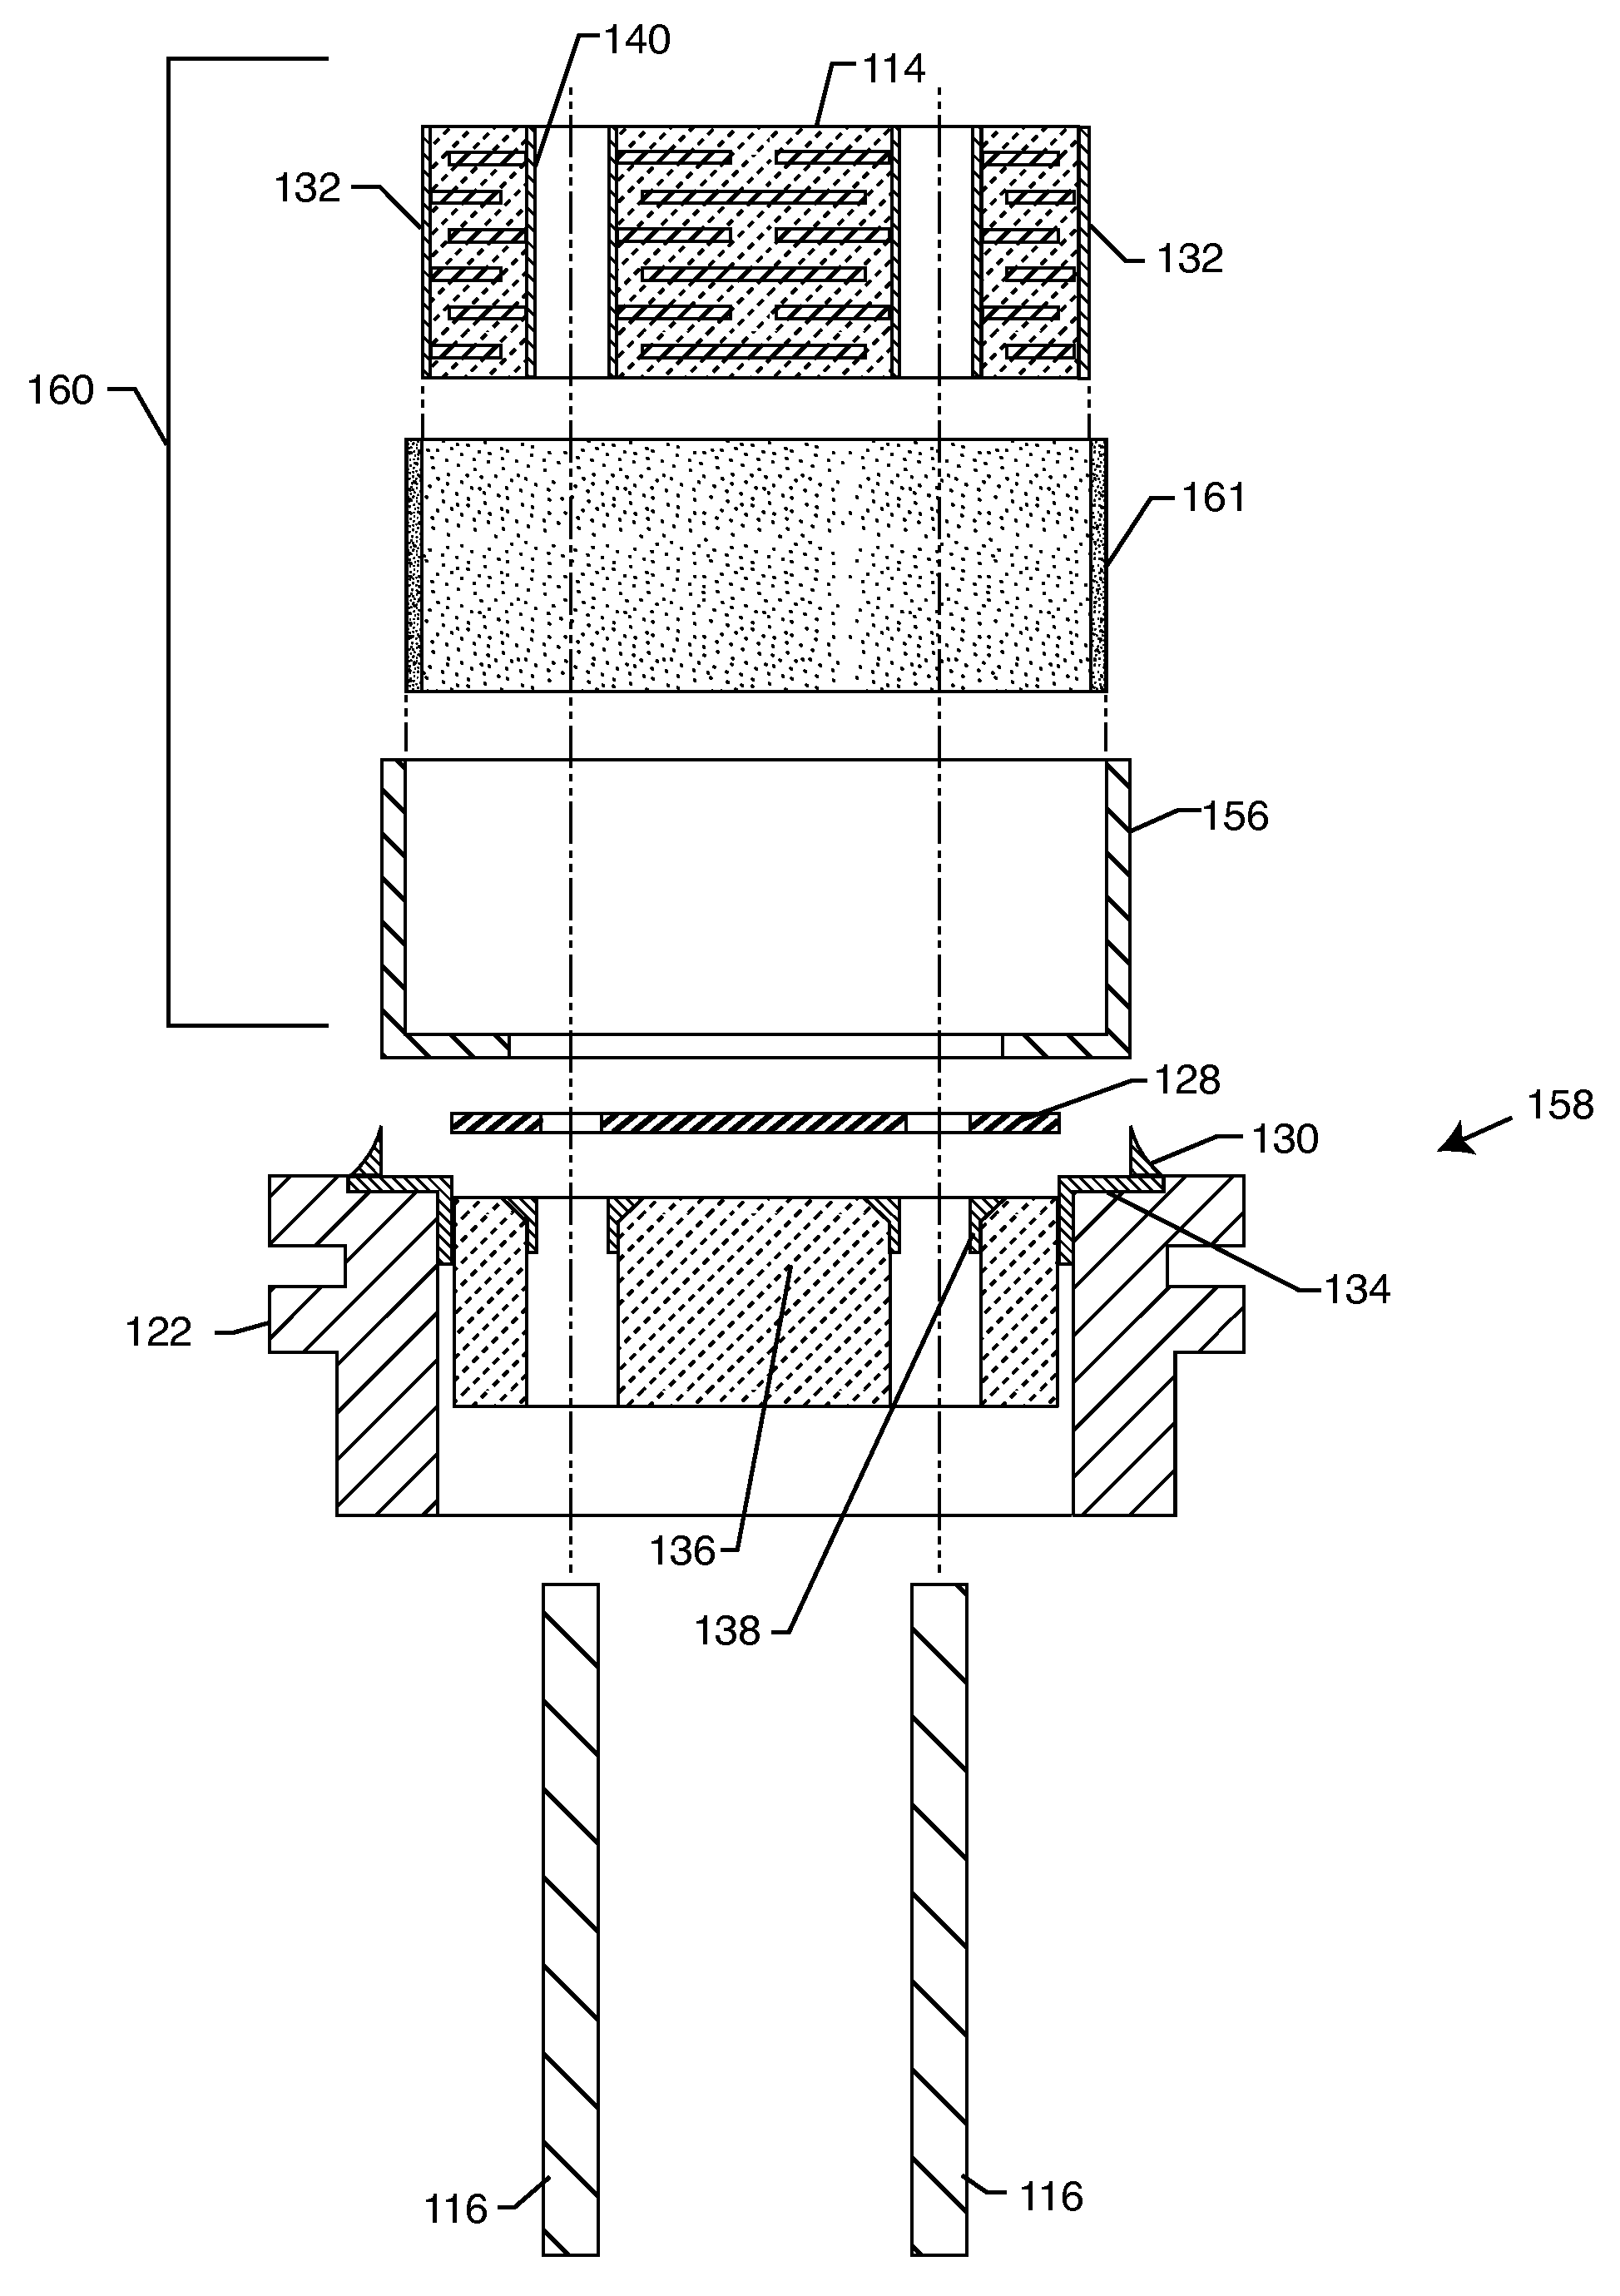 Modular EMI filtered terminal assembly for an active implantable medical device